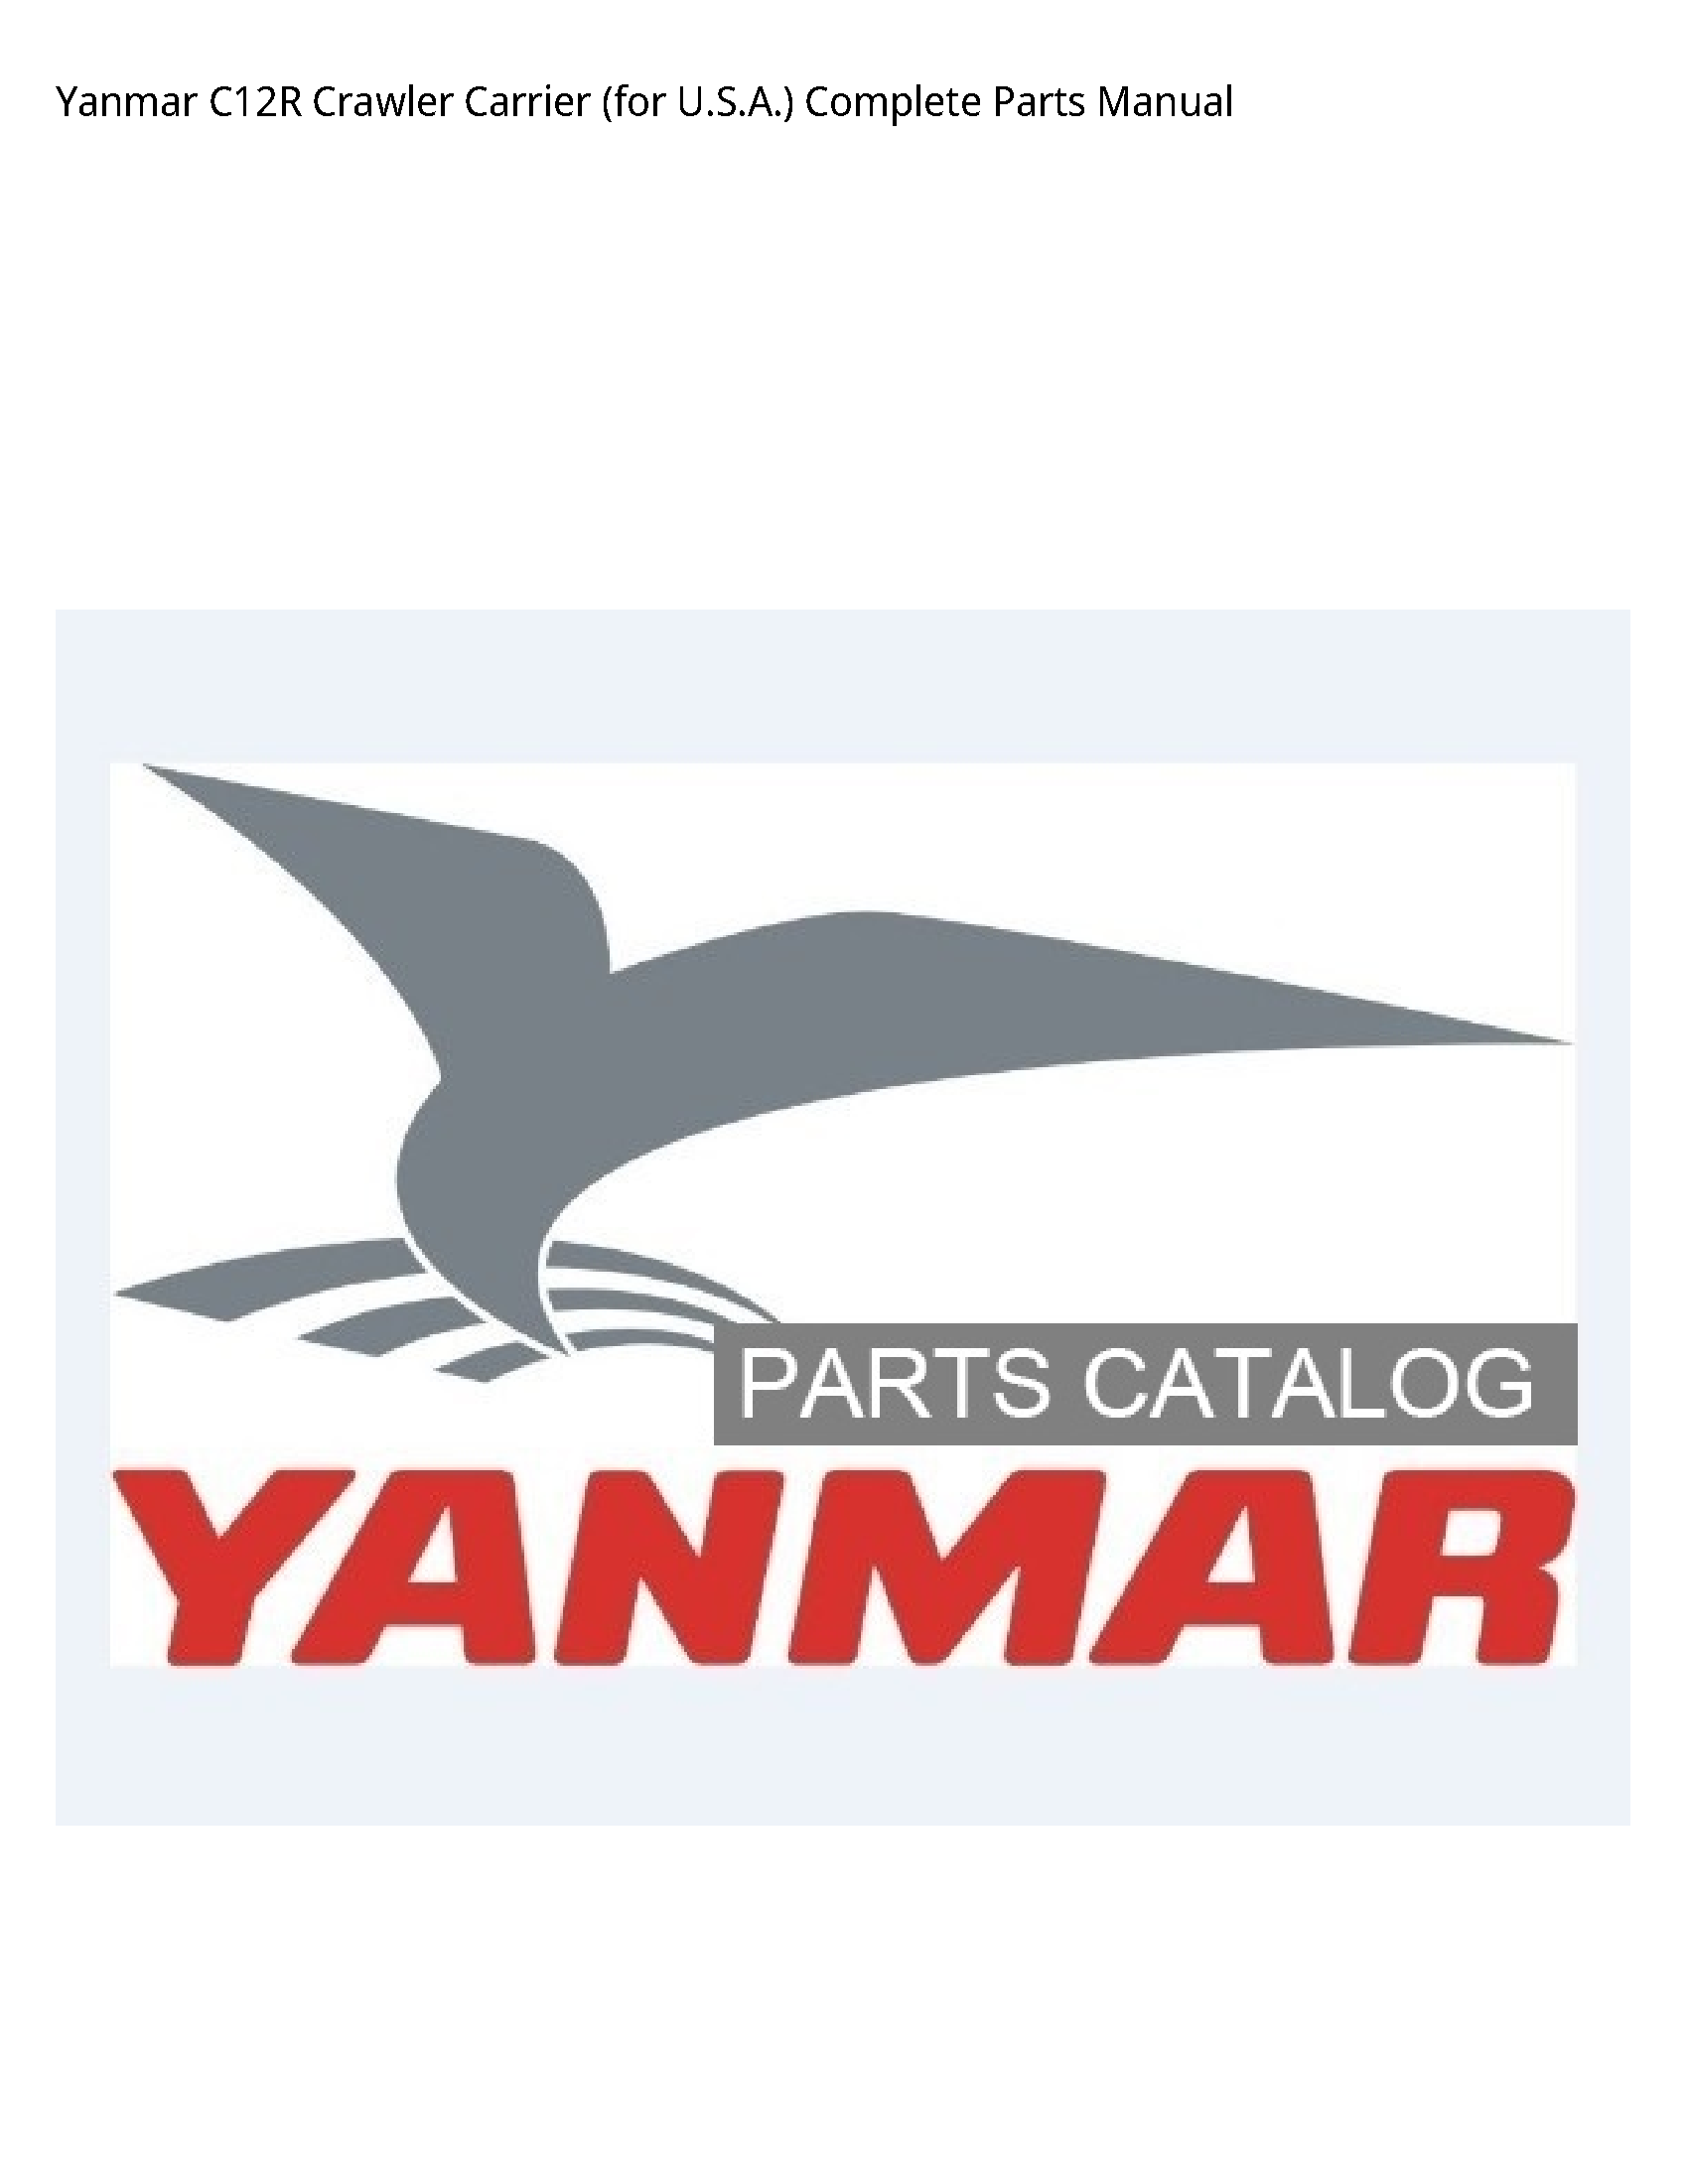 Yanmar C12R Crawler Carrier (for U.S.A.) Complete Parts manual